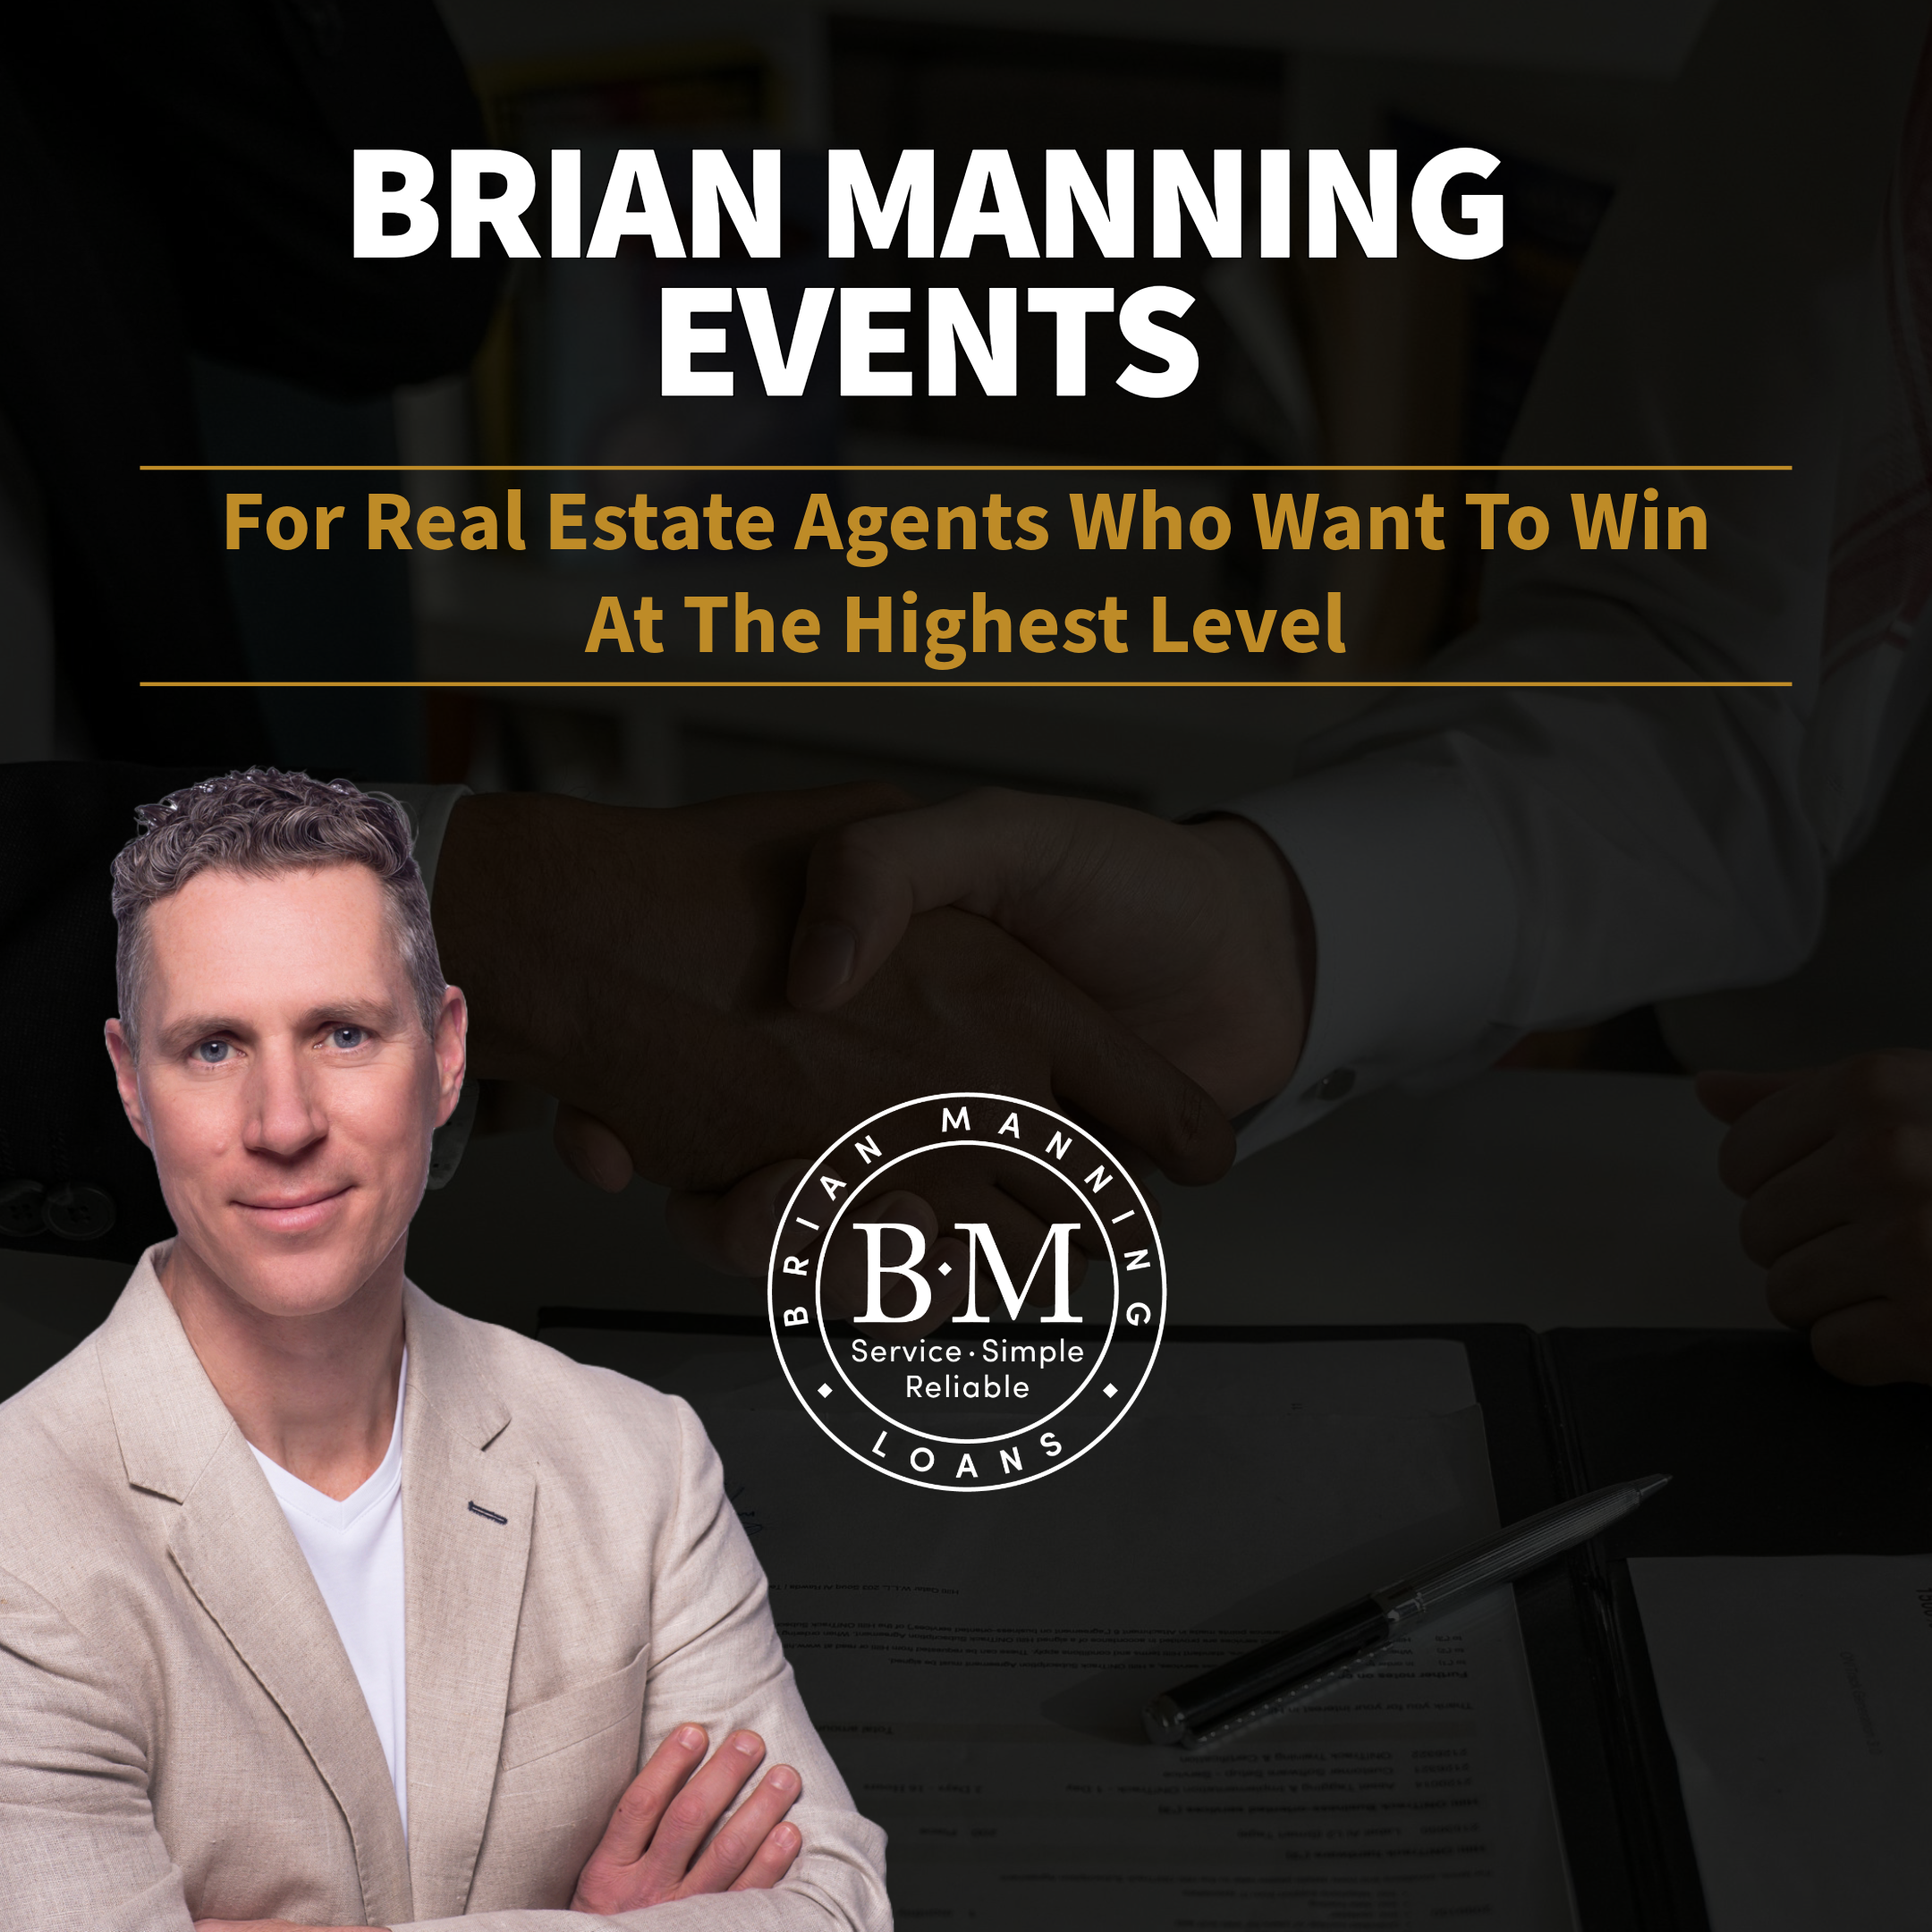 Brian Manning Events